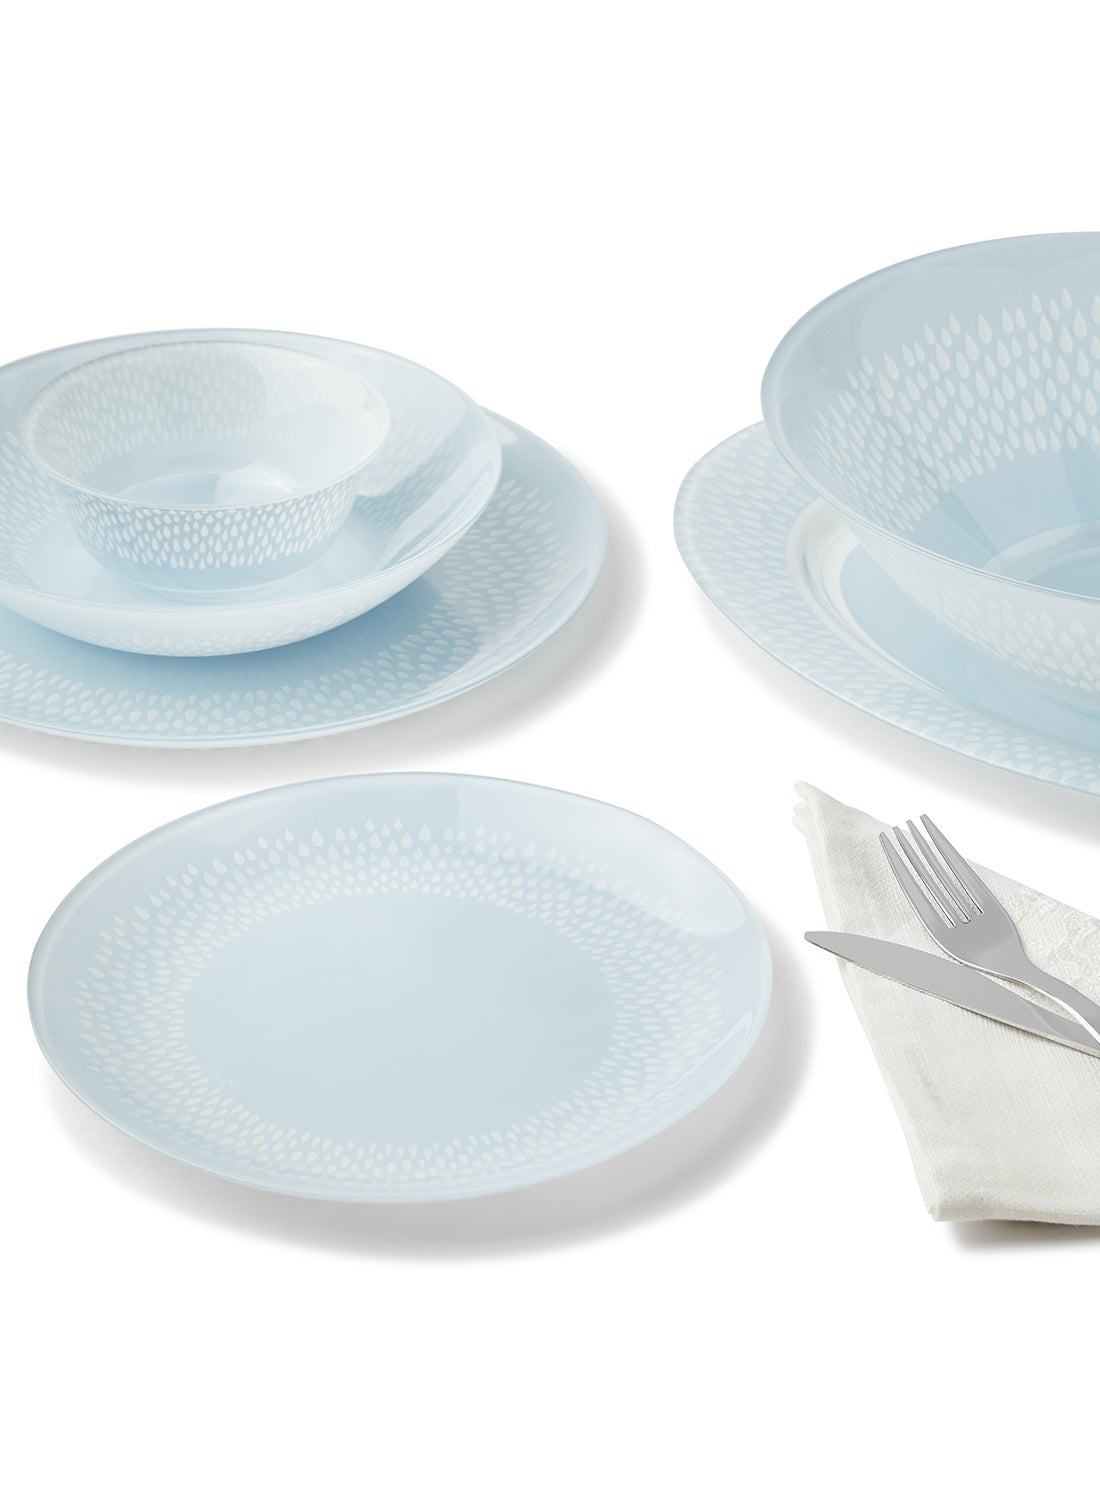 34 Piece Glass Dinner Set For Everyday Use - Light Weight Dishes, Plates - Dinner Plate, Side Plate, Bowl - Serves 6 - Printed Design Alice Blue 